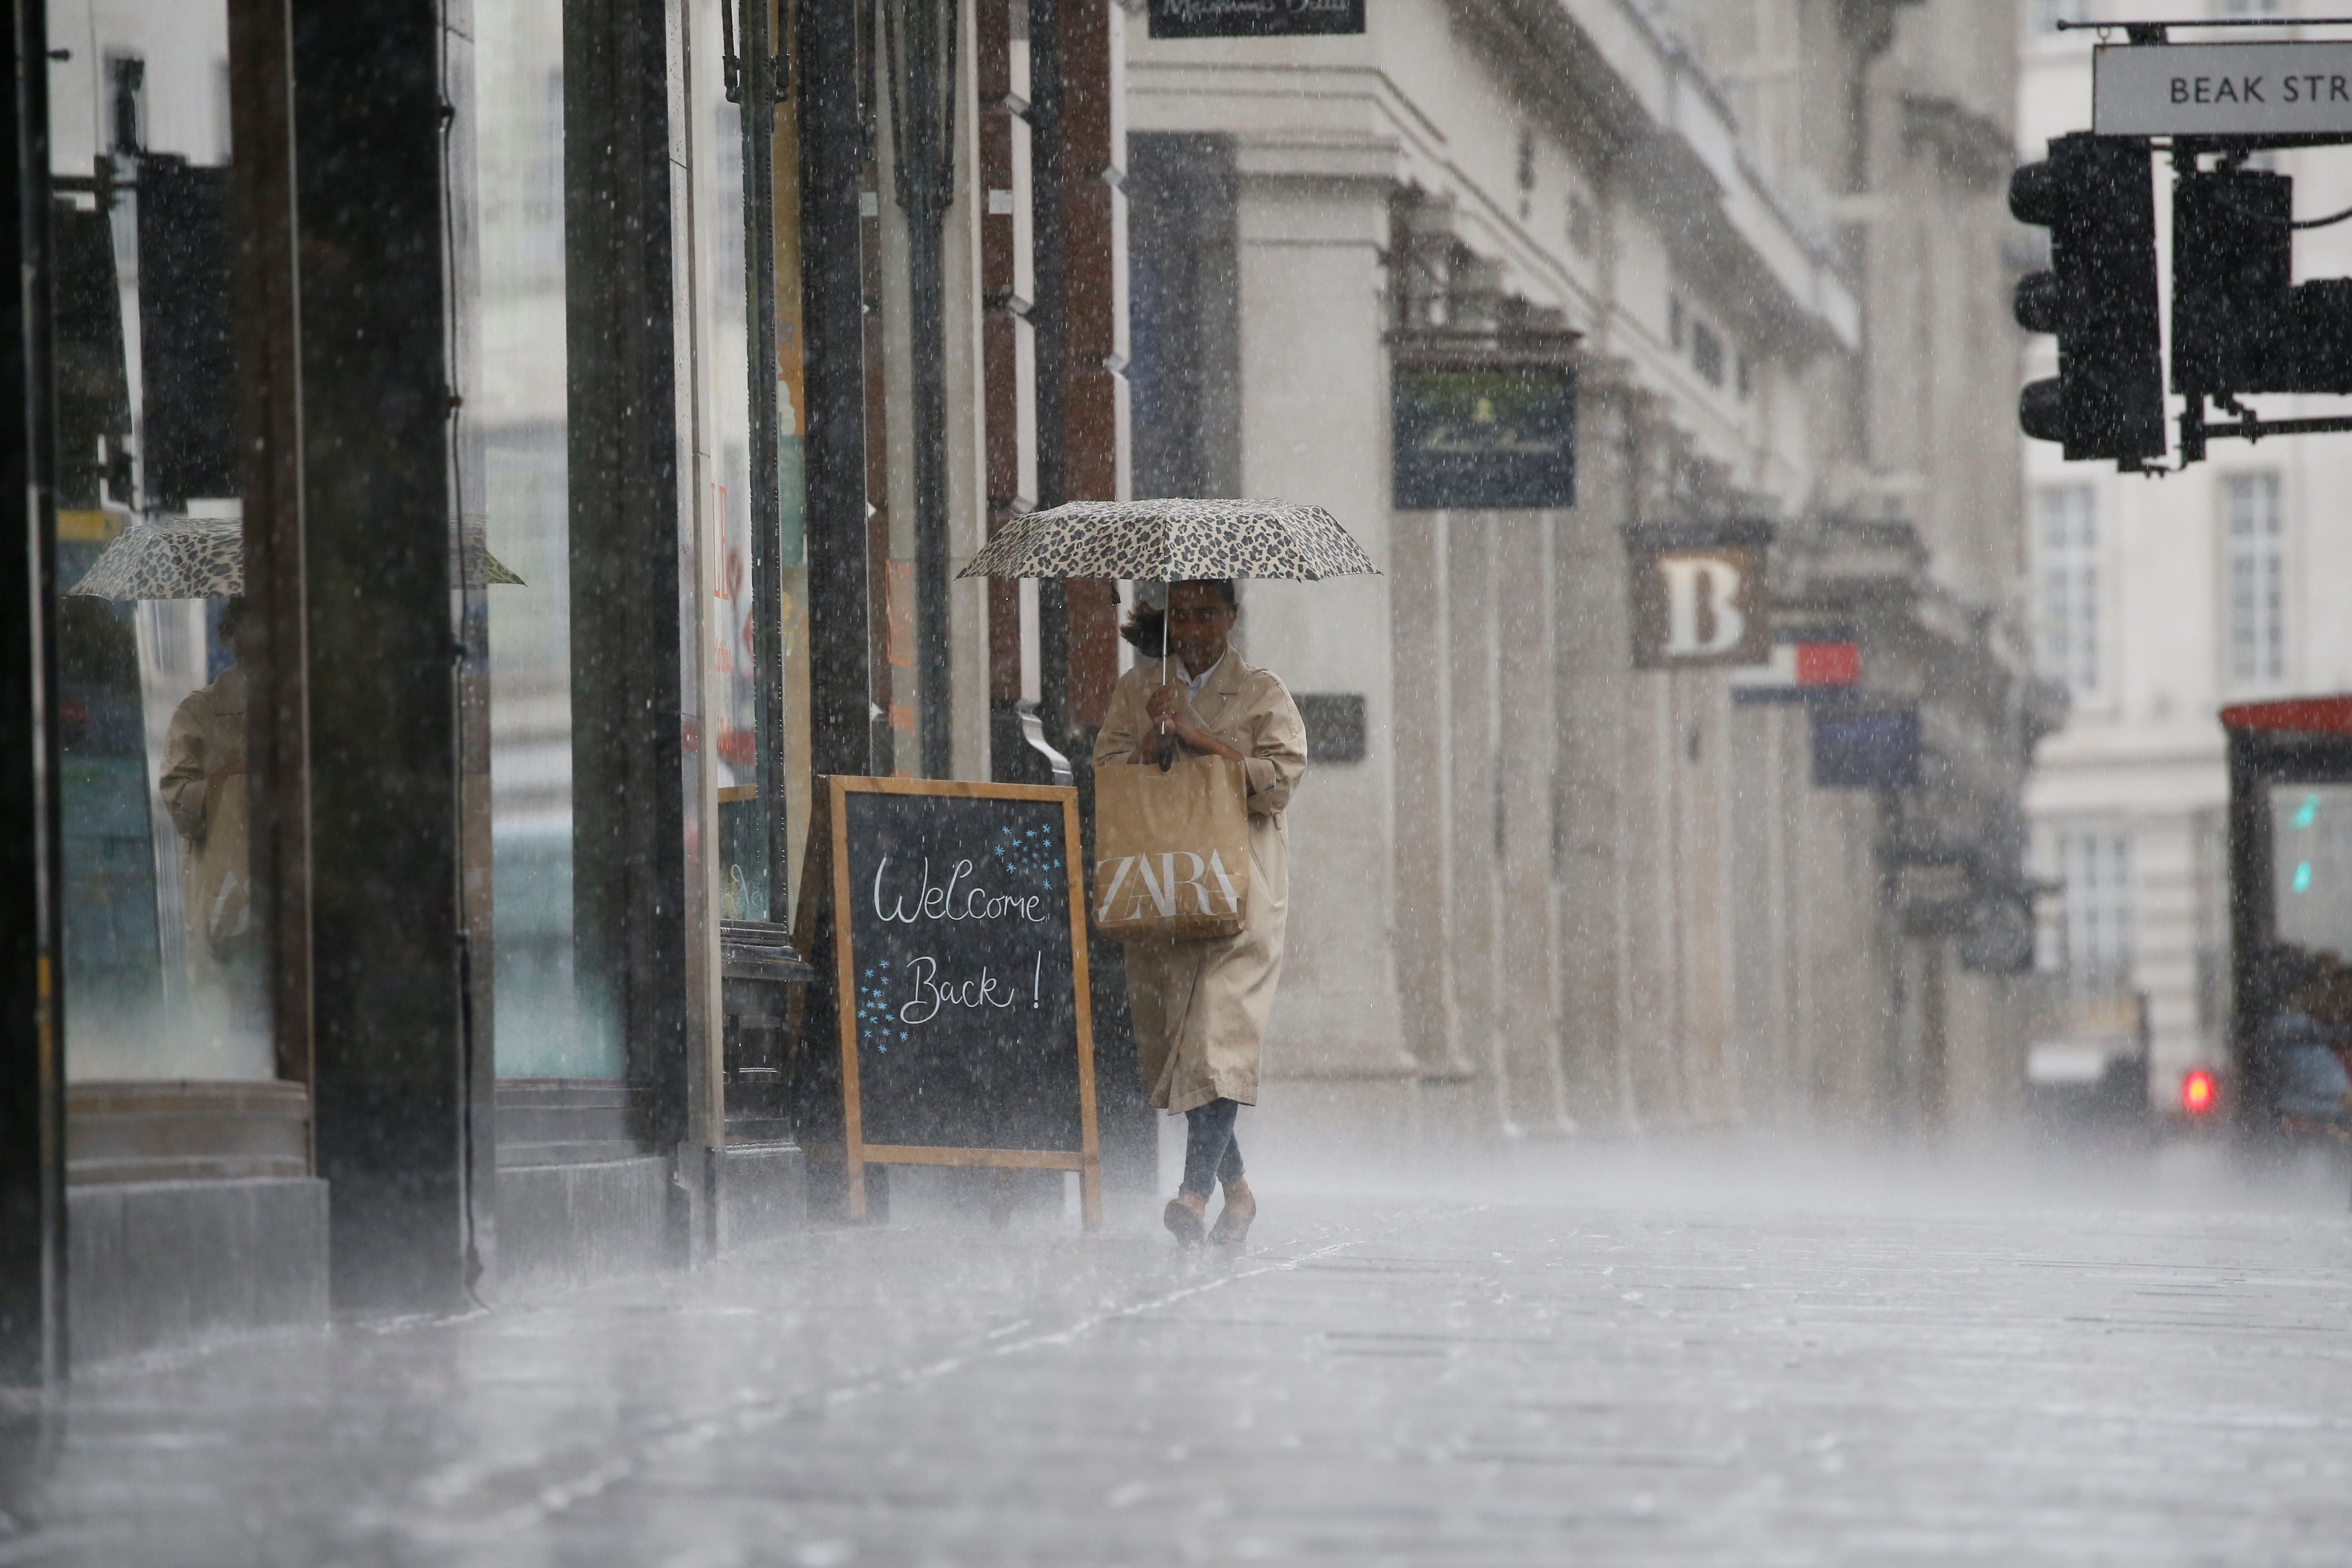 Weather warnings are in place for rain and snow in Scotland